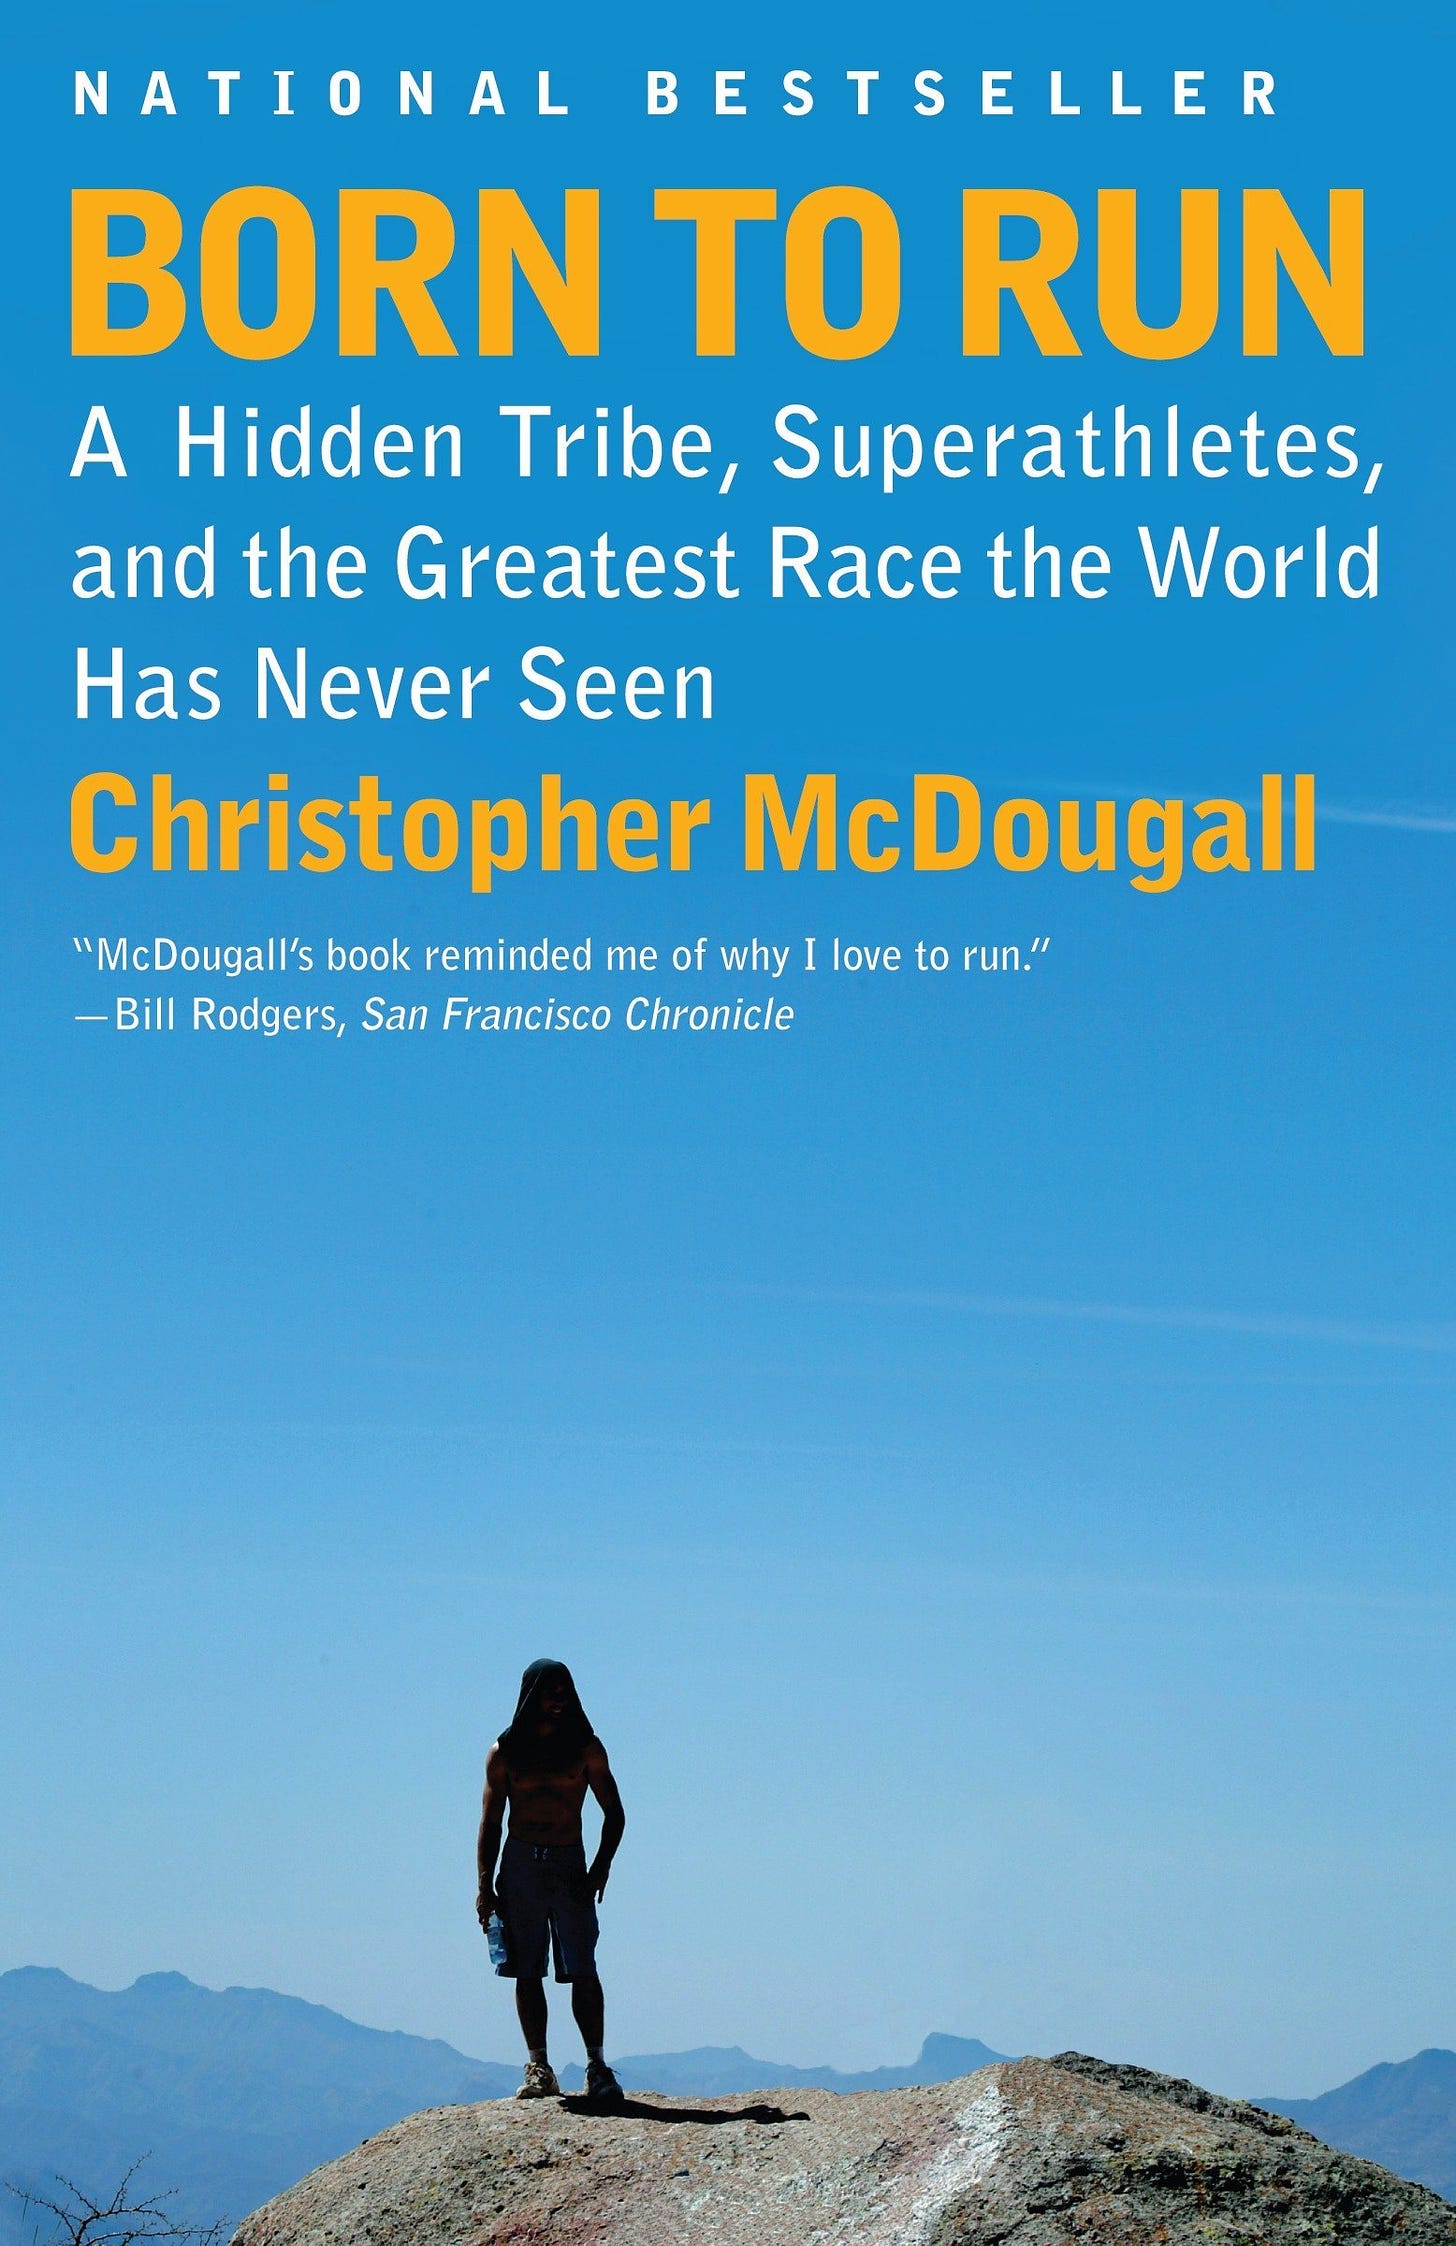 Born to Run: A Hidden Tribe, Superathletes, and the Greatest Race the World  Has Never Seen: McDougall, Christopher: 9780307279187: Amazon.com: Books